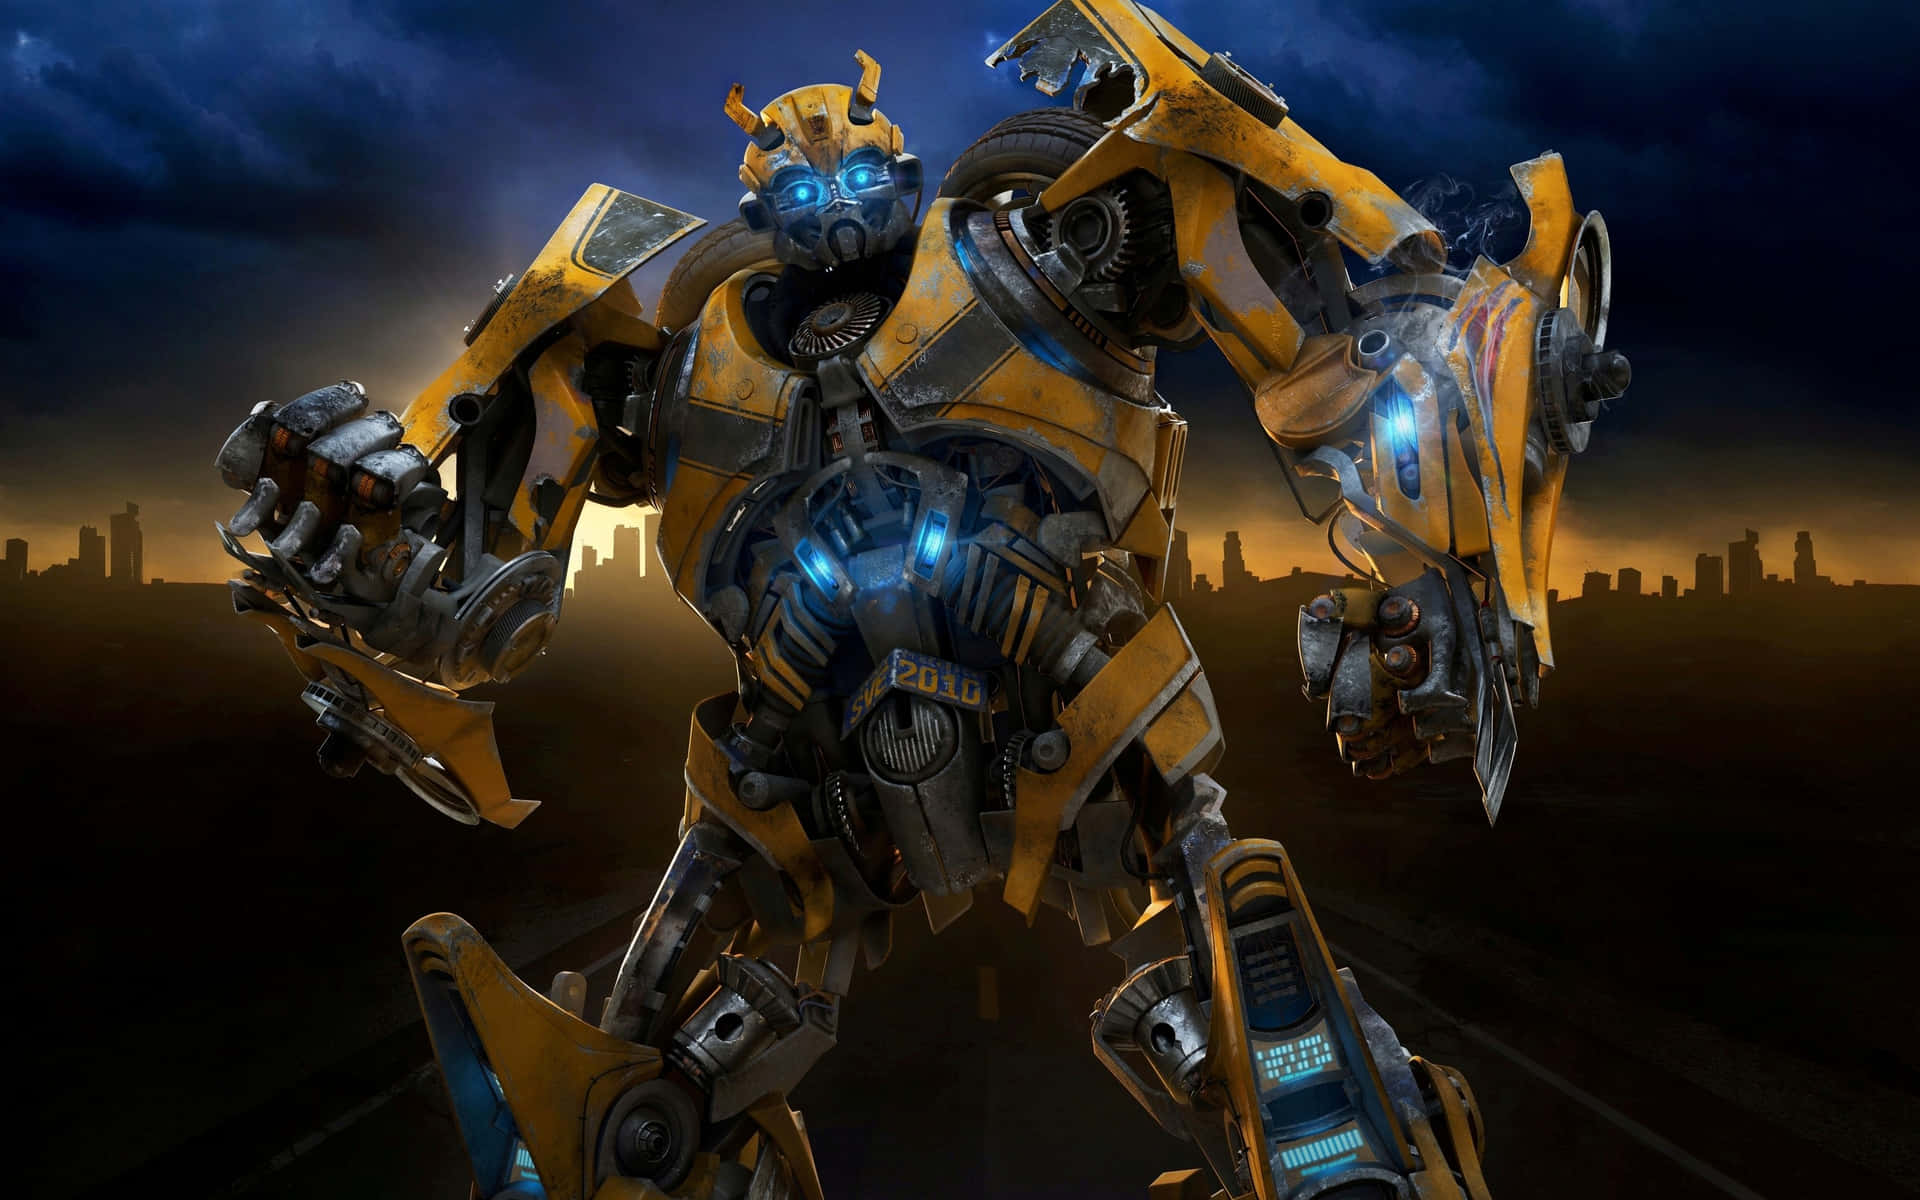 “Welcome to Adventure with Bumblebee”